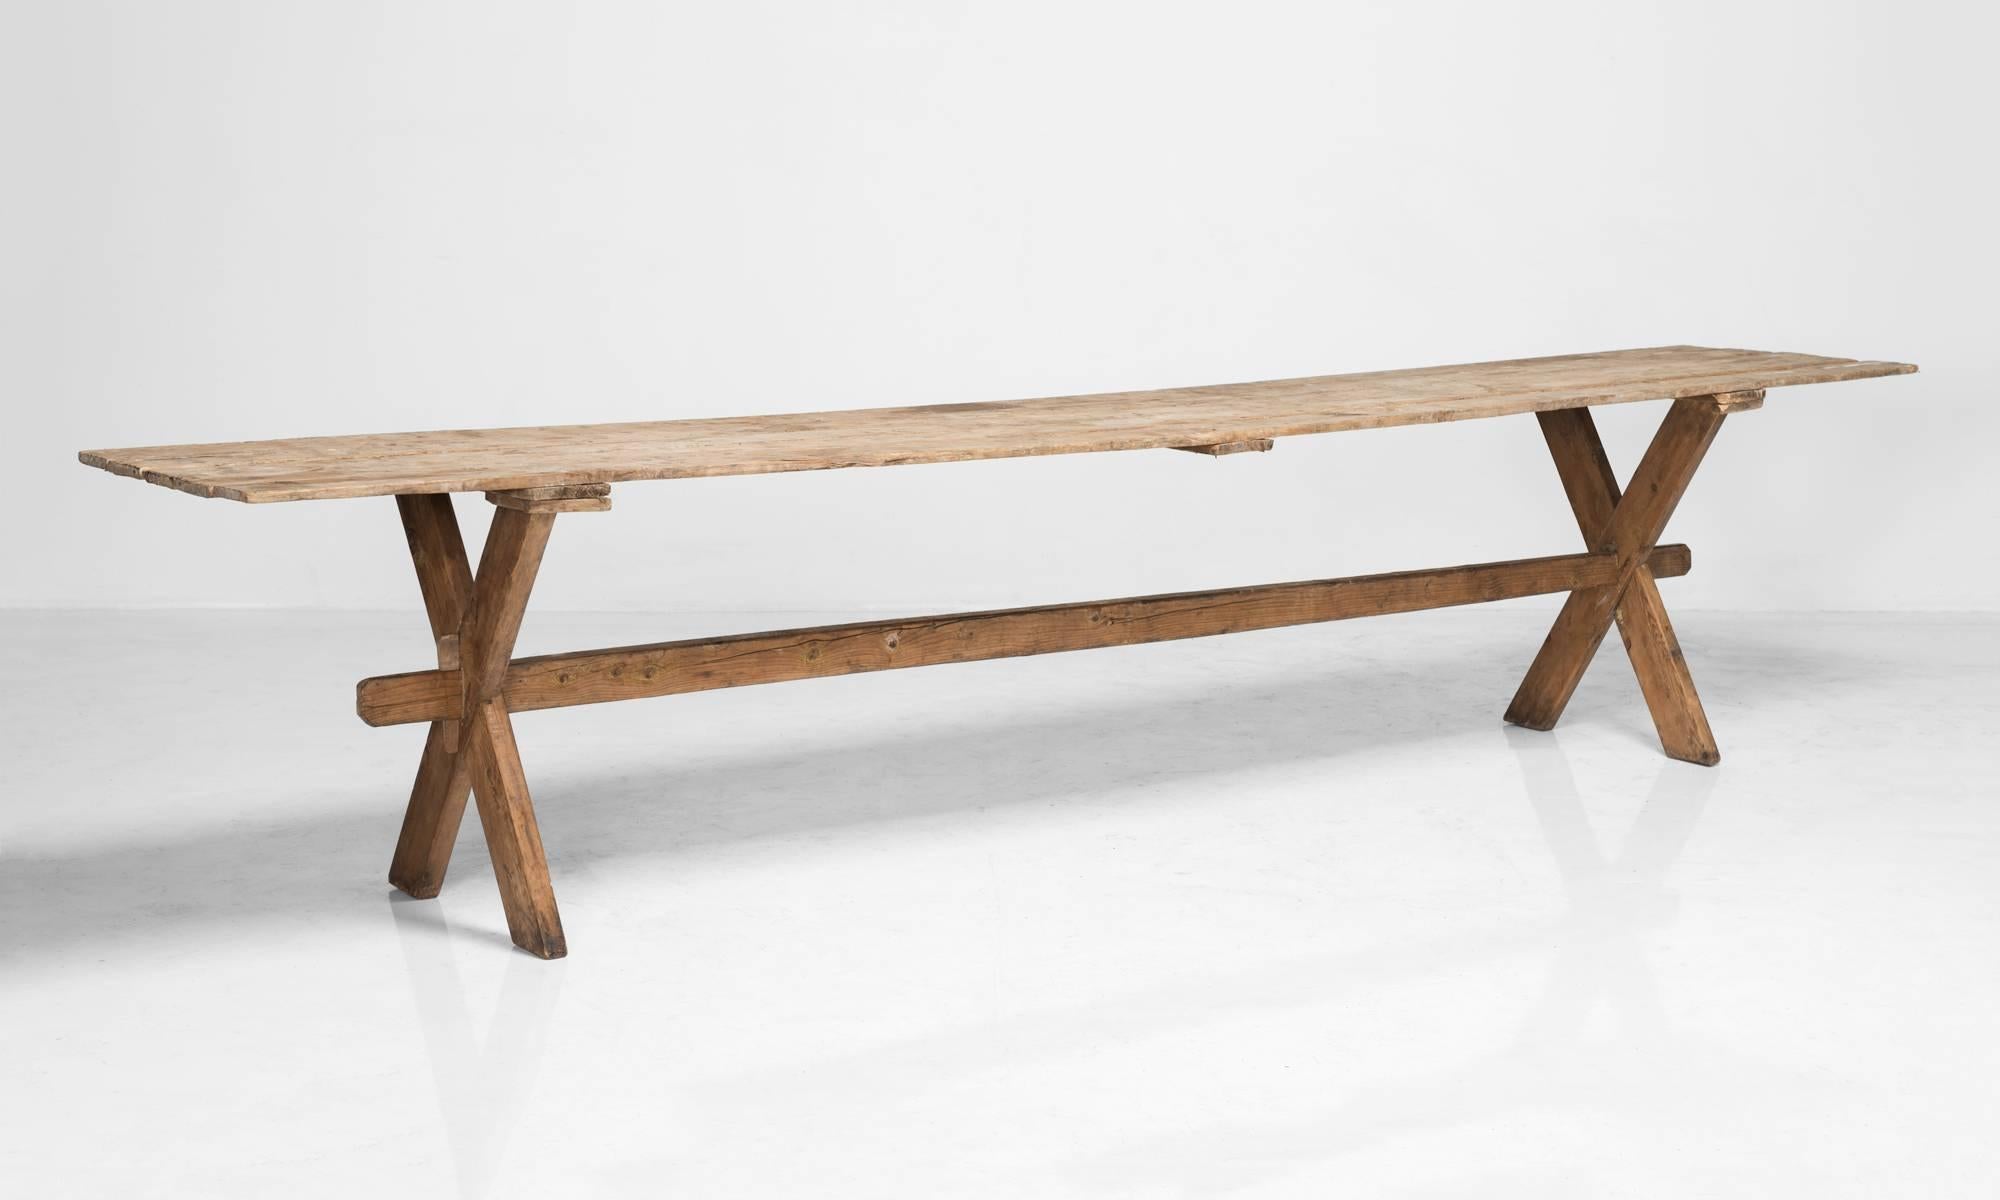 Primitive Trestle Table, circa 1930

Very large size with sturdy construction and fine patina.